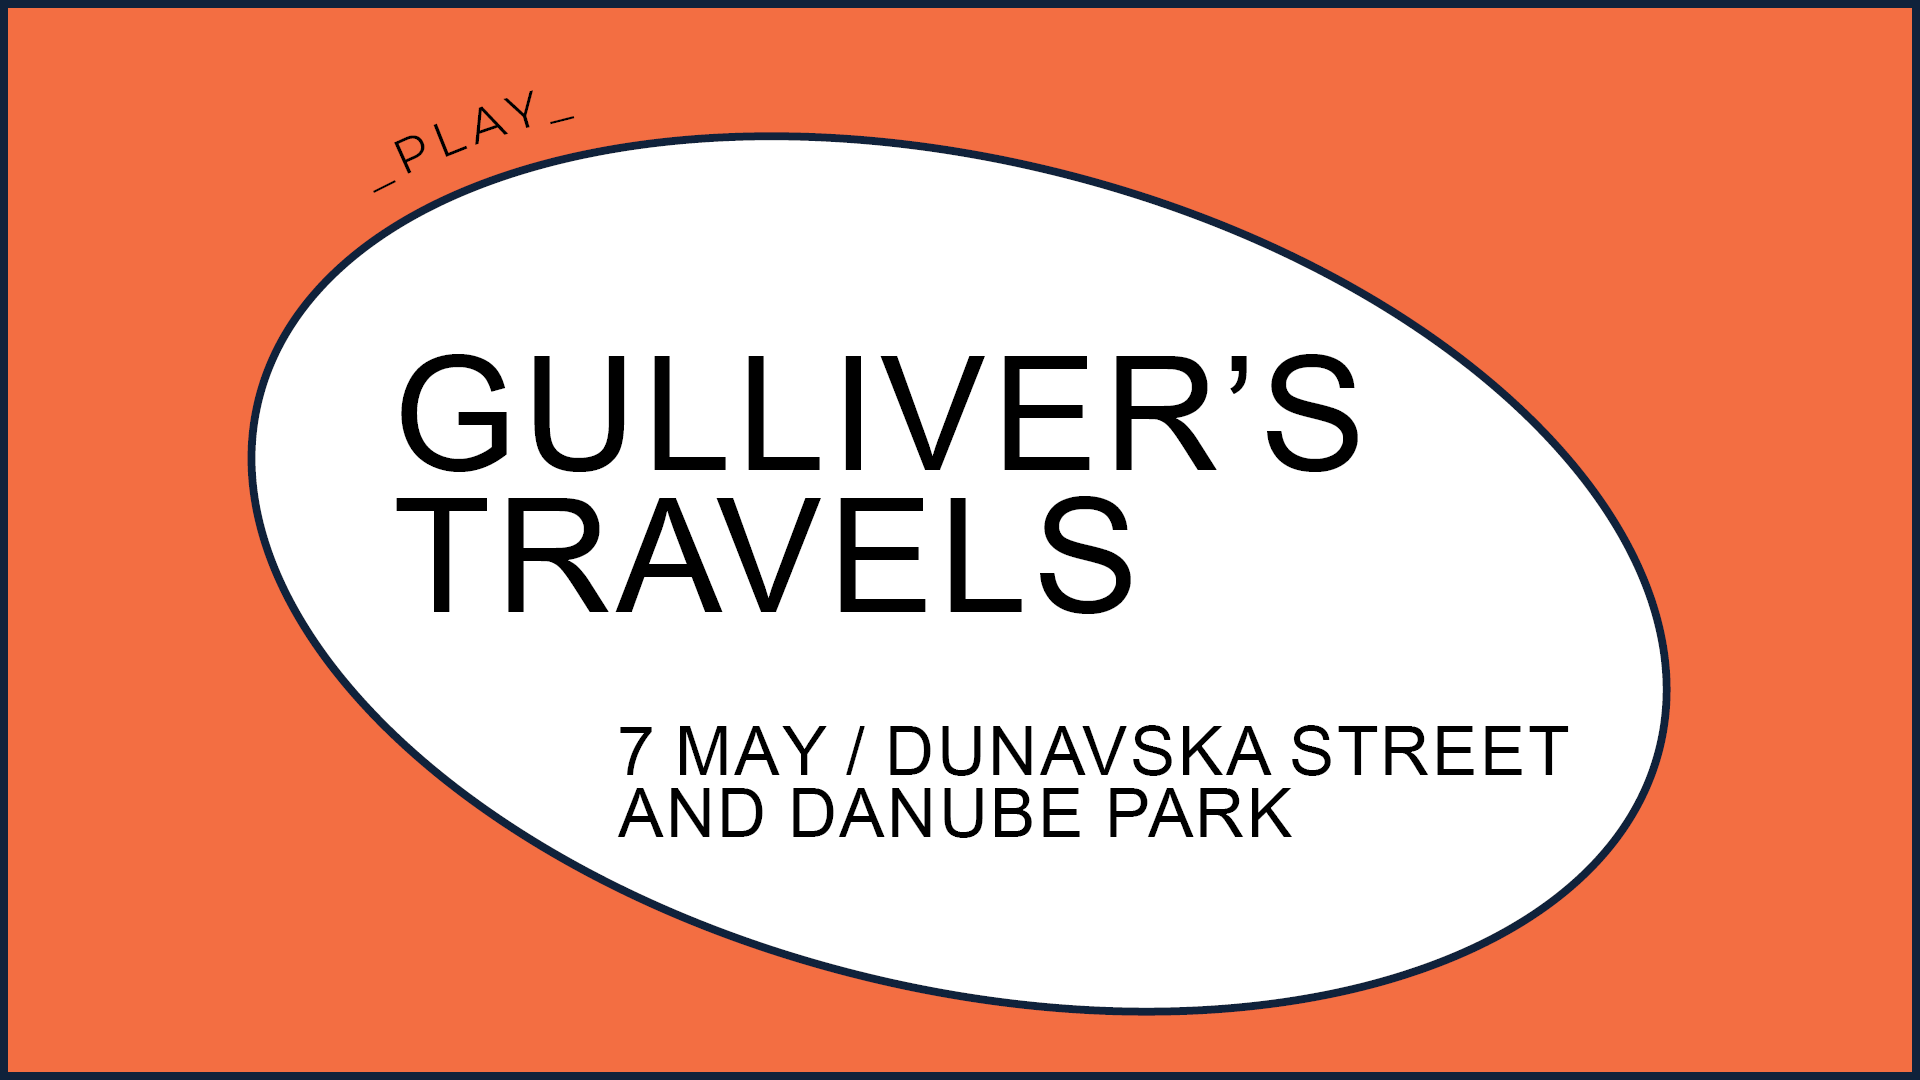 gulivers travels play